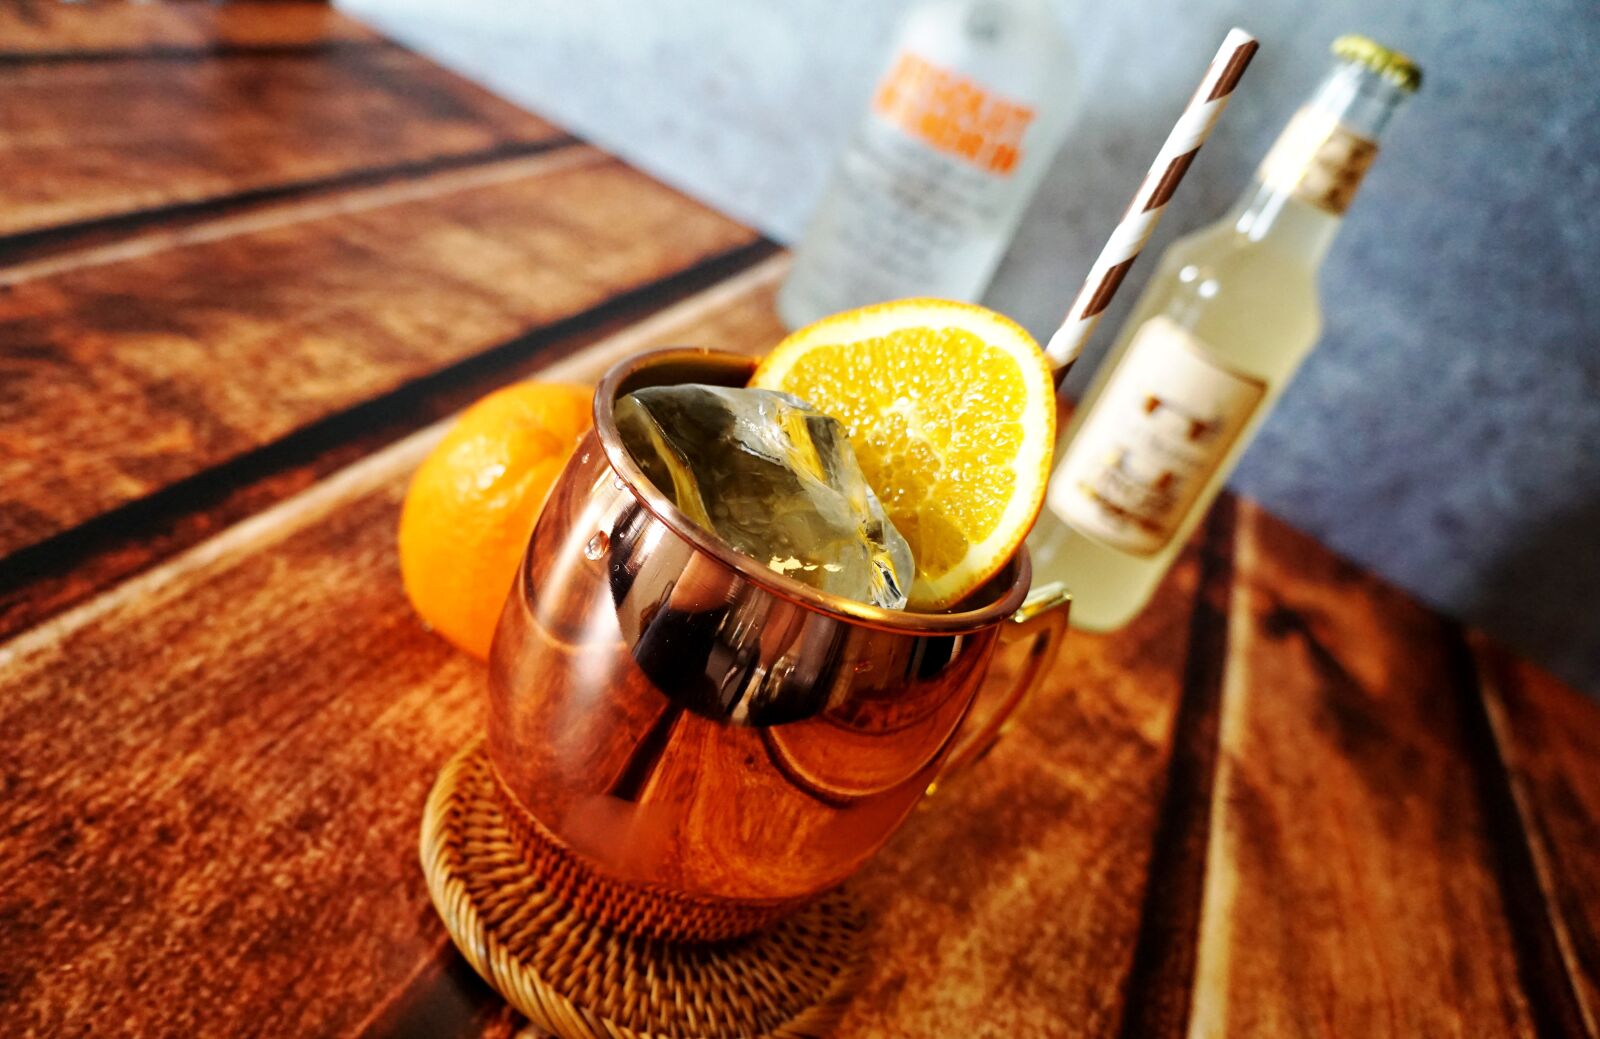 Sony a6000 sample photo. Mandarin mule, moscow mule photography